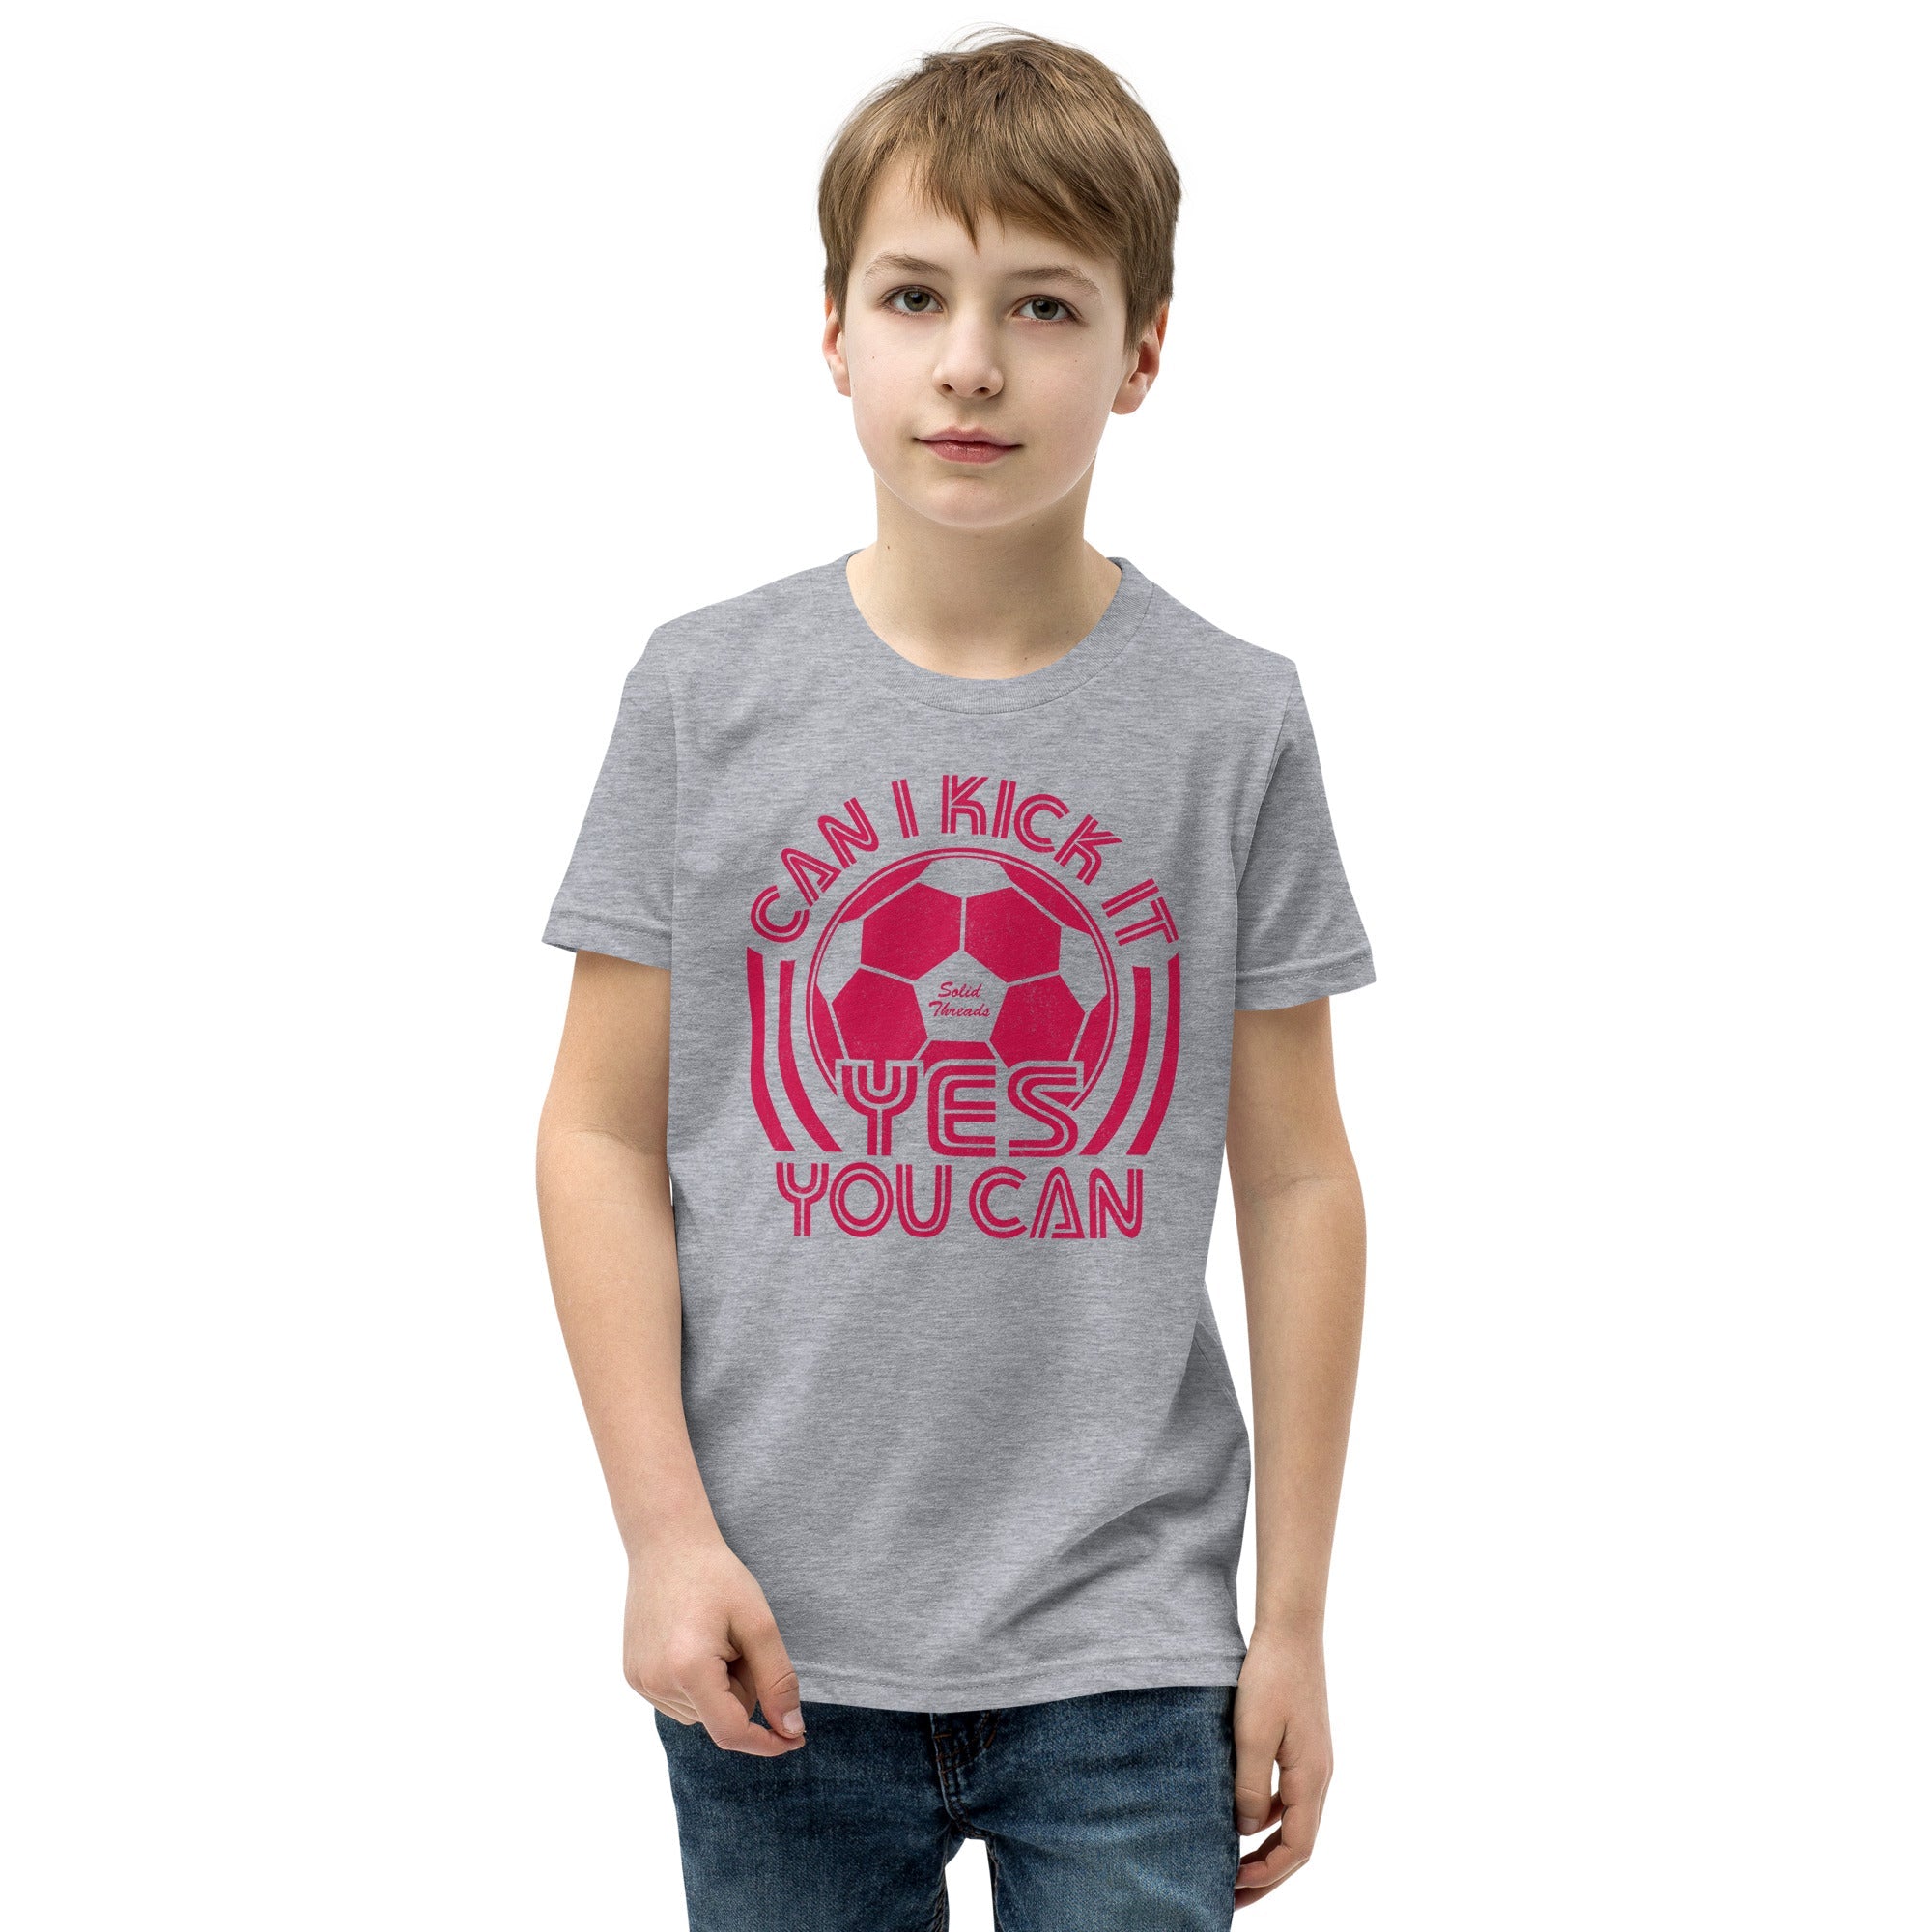 Youth Can I Kick It Retro Music Extra Soft T-Shirt | Funny Soccer Kids Tee Boy Model | Solid Threads